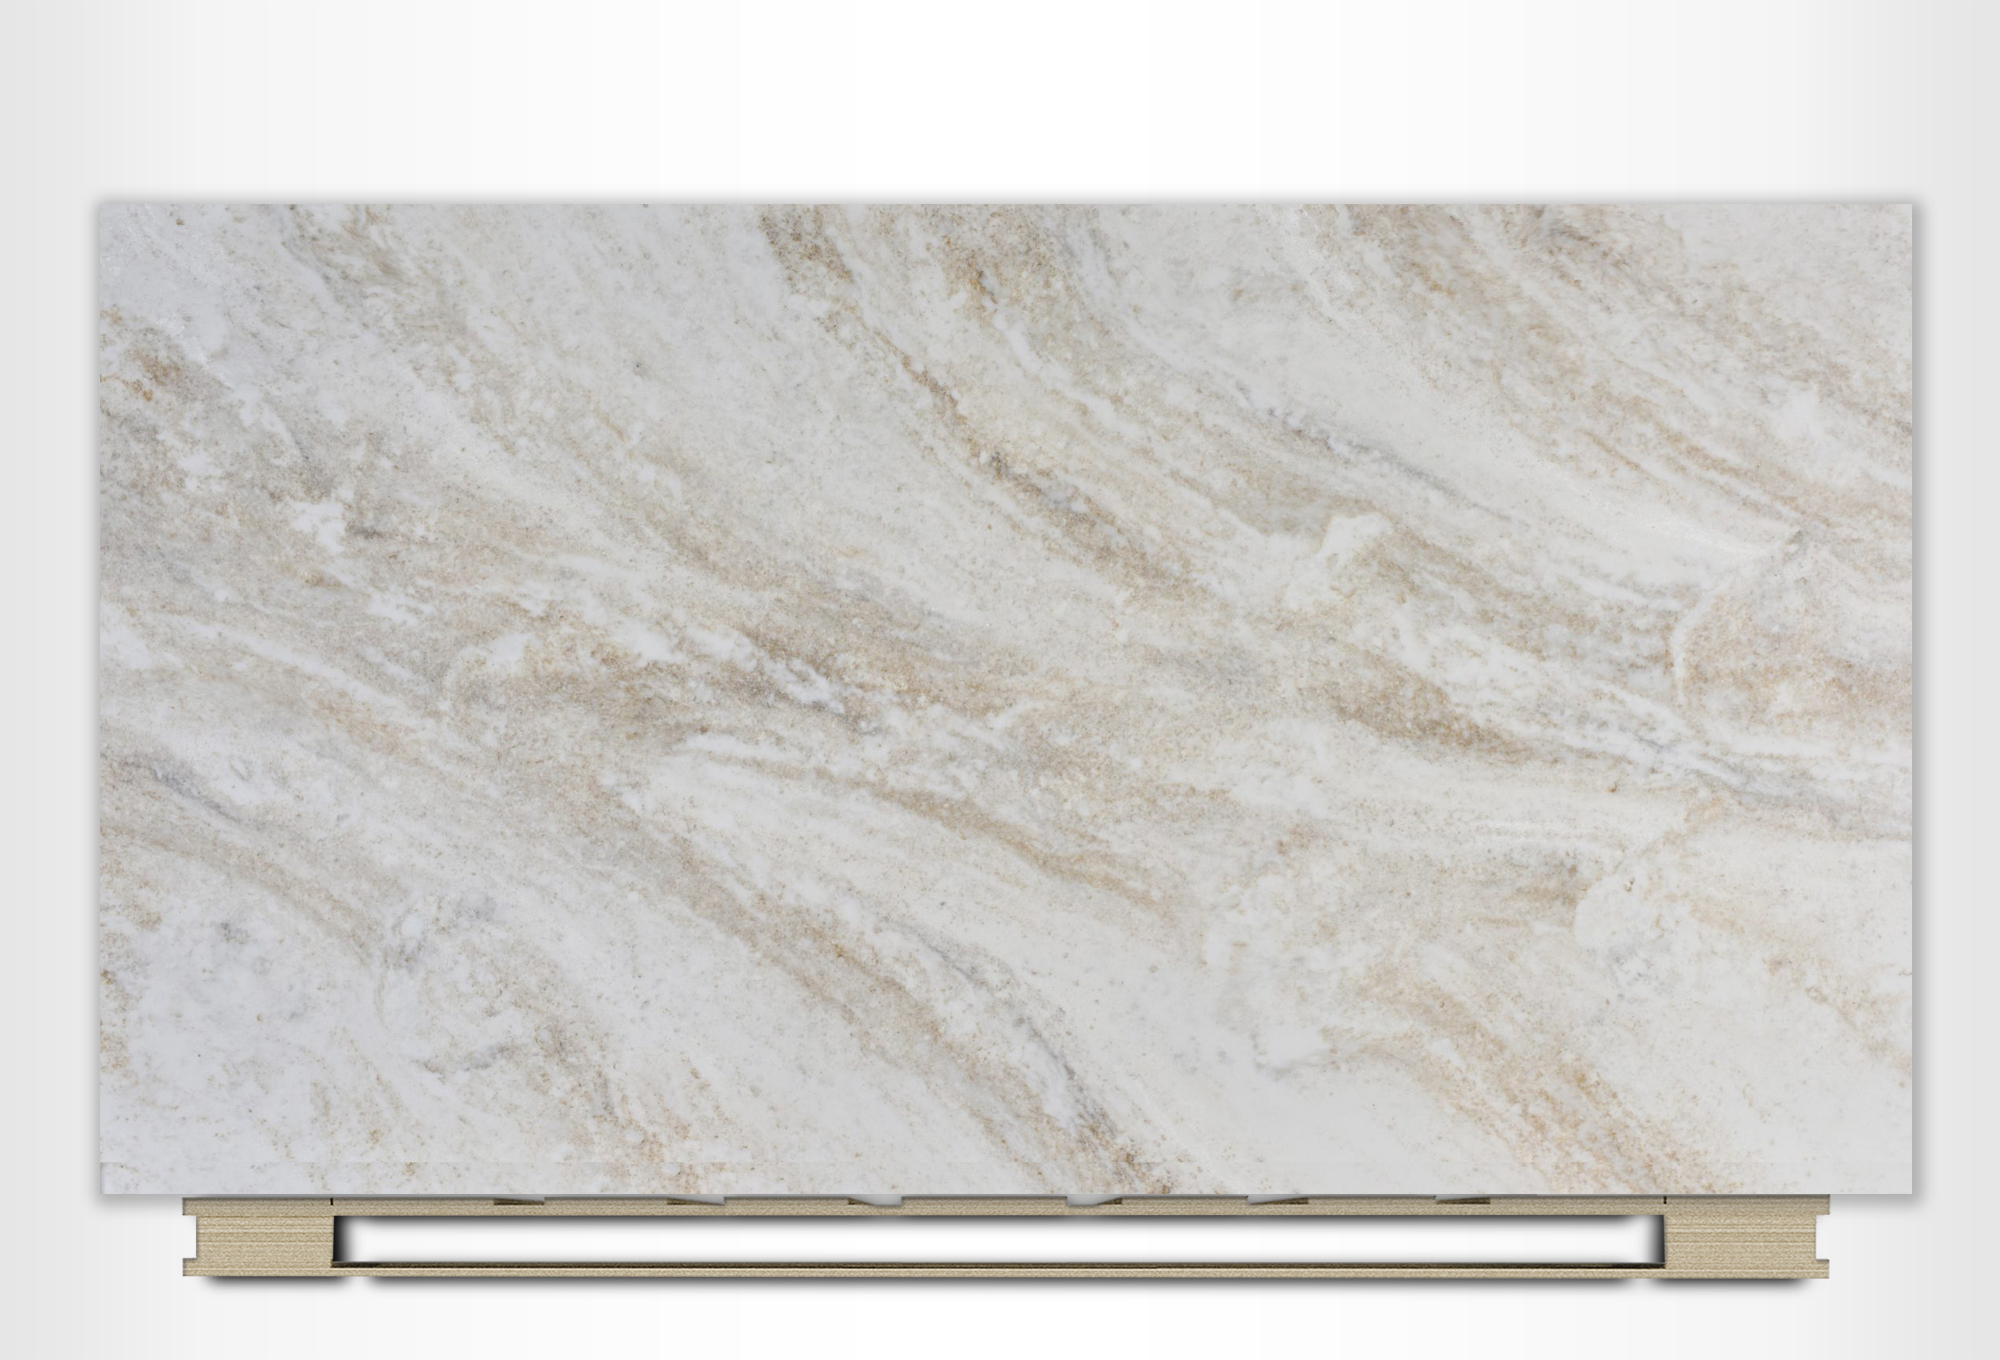 Mahal Ivory YDL Stone Slab Polished – Special Edition